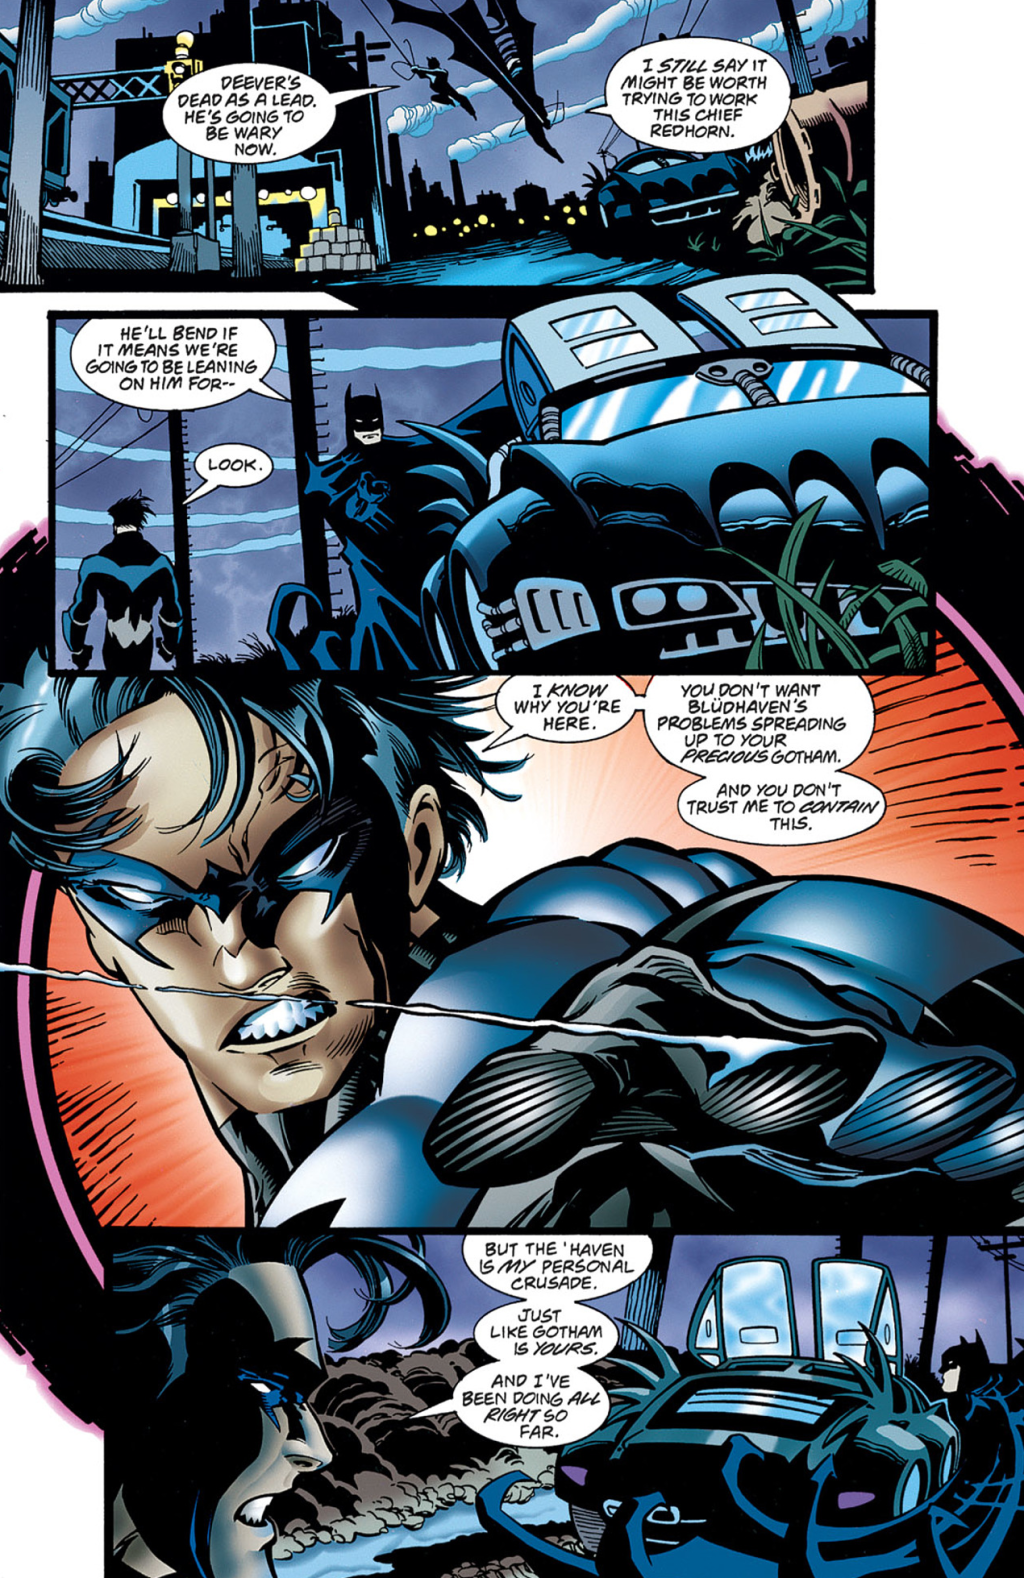 Nightwing tells Batman to let him protect Blüdhaven his way in Nightwing Vol. 2 14 "Dead Meat" (1997), DC. Words by Chuck Dixon, art by Scott McDaniel, Karl Story, Roberta Tewes, and John Costanza.